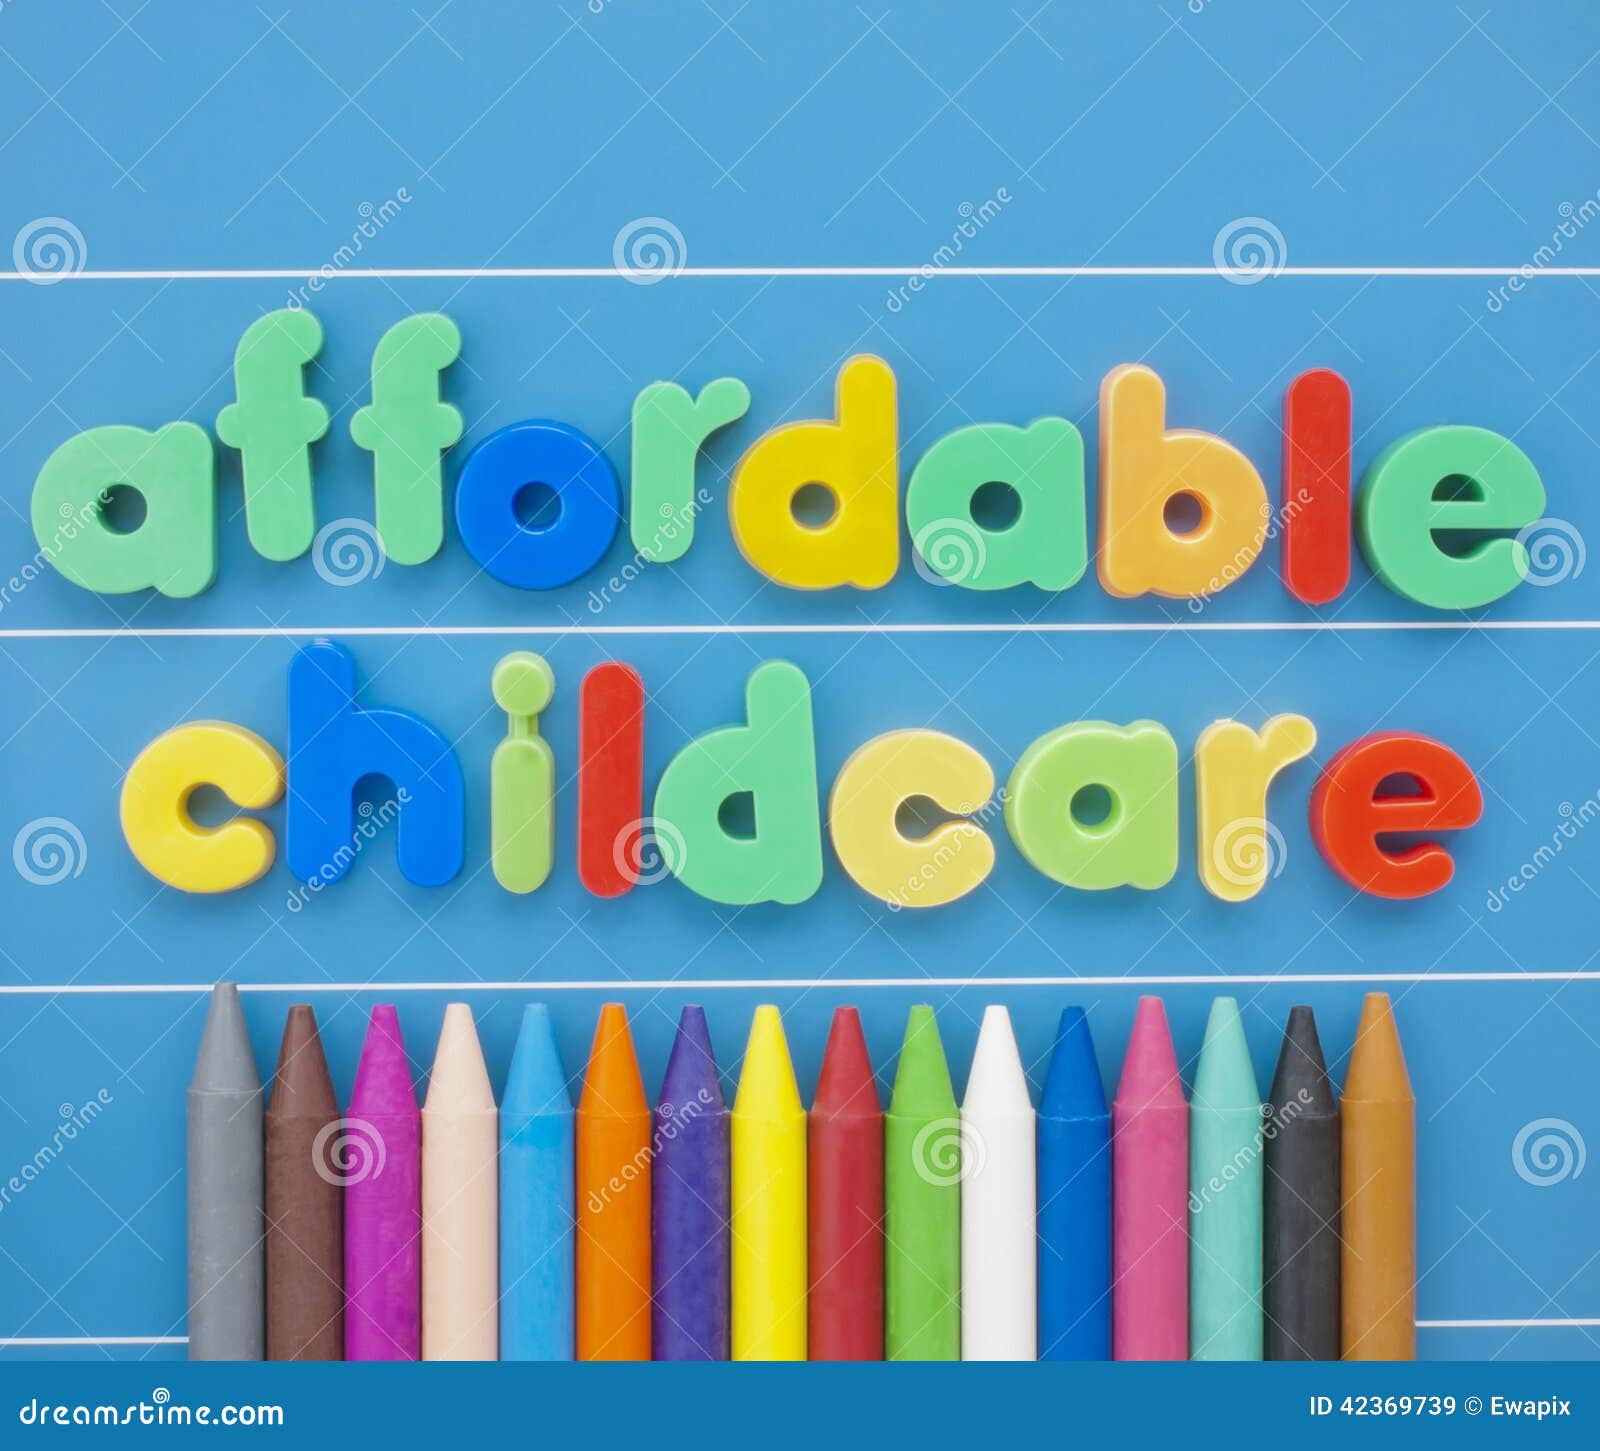 affordable childcare.